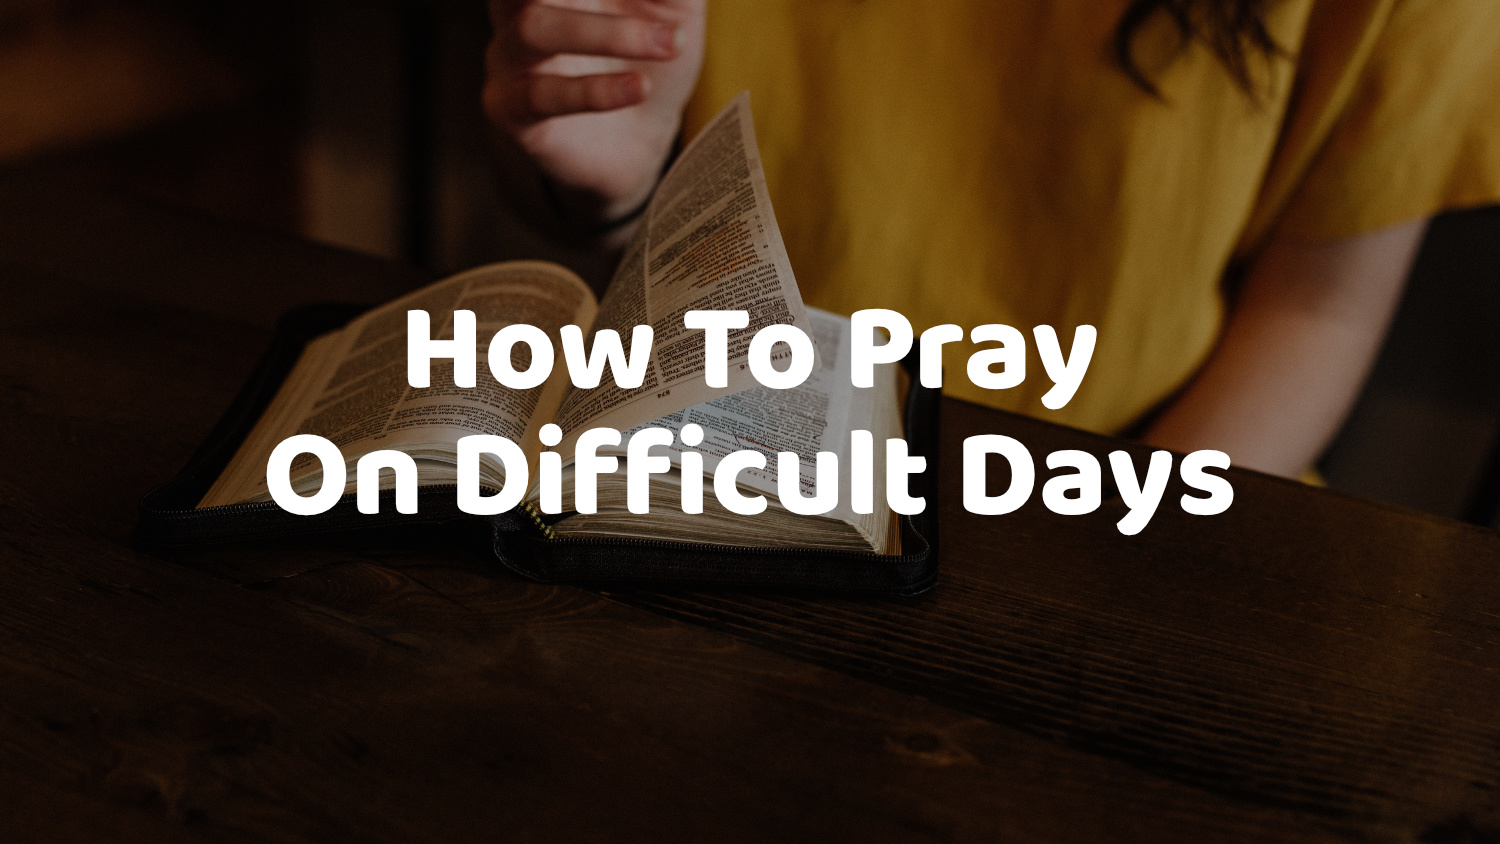 How To Pray On Difficult Days